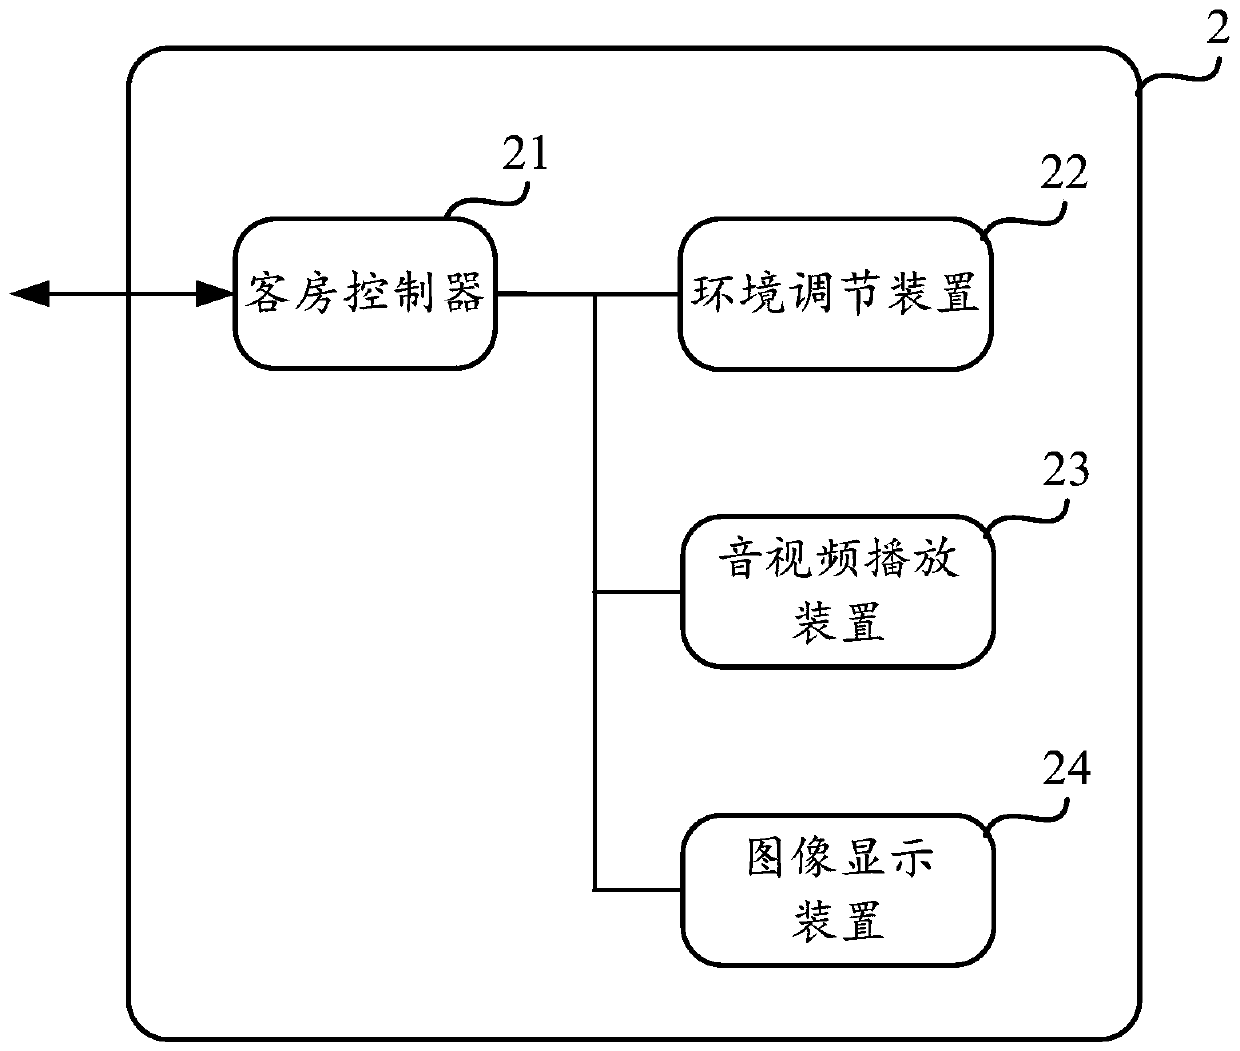 A smart hotel room ecological environment control system and control method